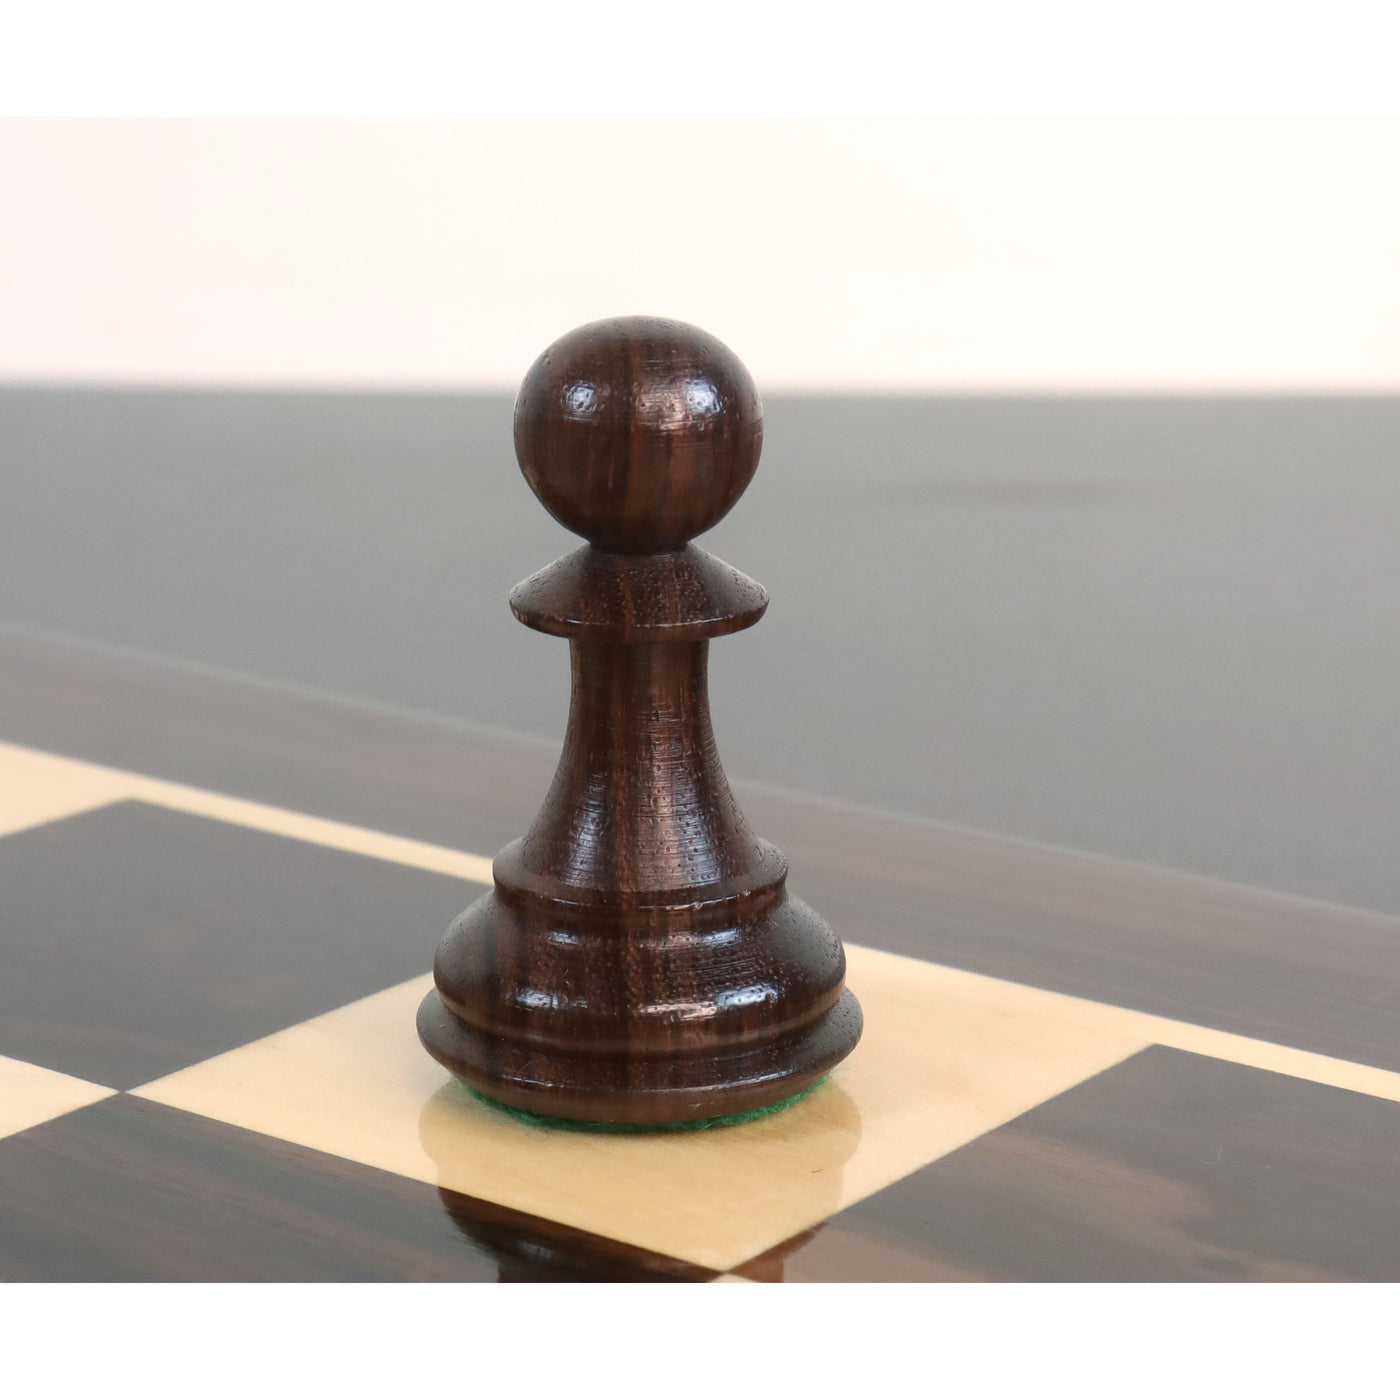 4" Sleek Staunton Luxury Chess Set - Chess Pieces Only - Triple Weighted Rose Wood